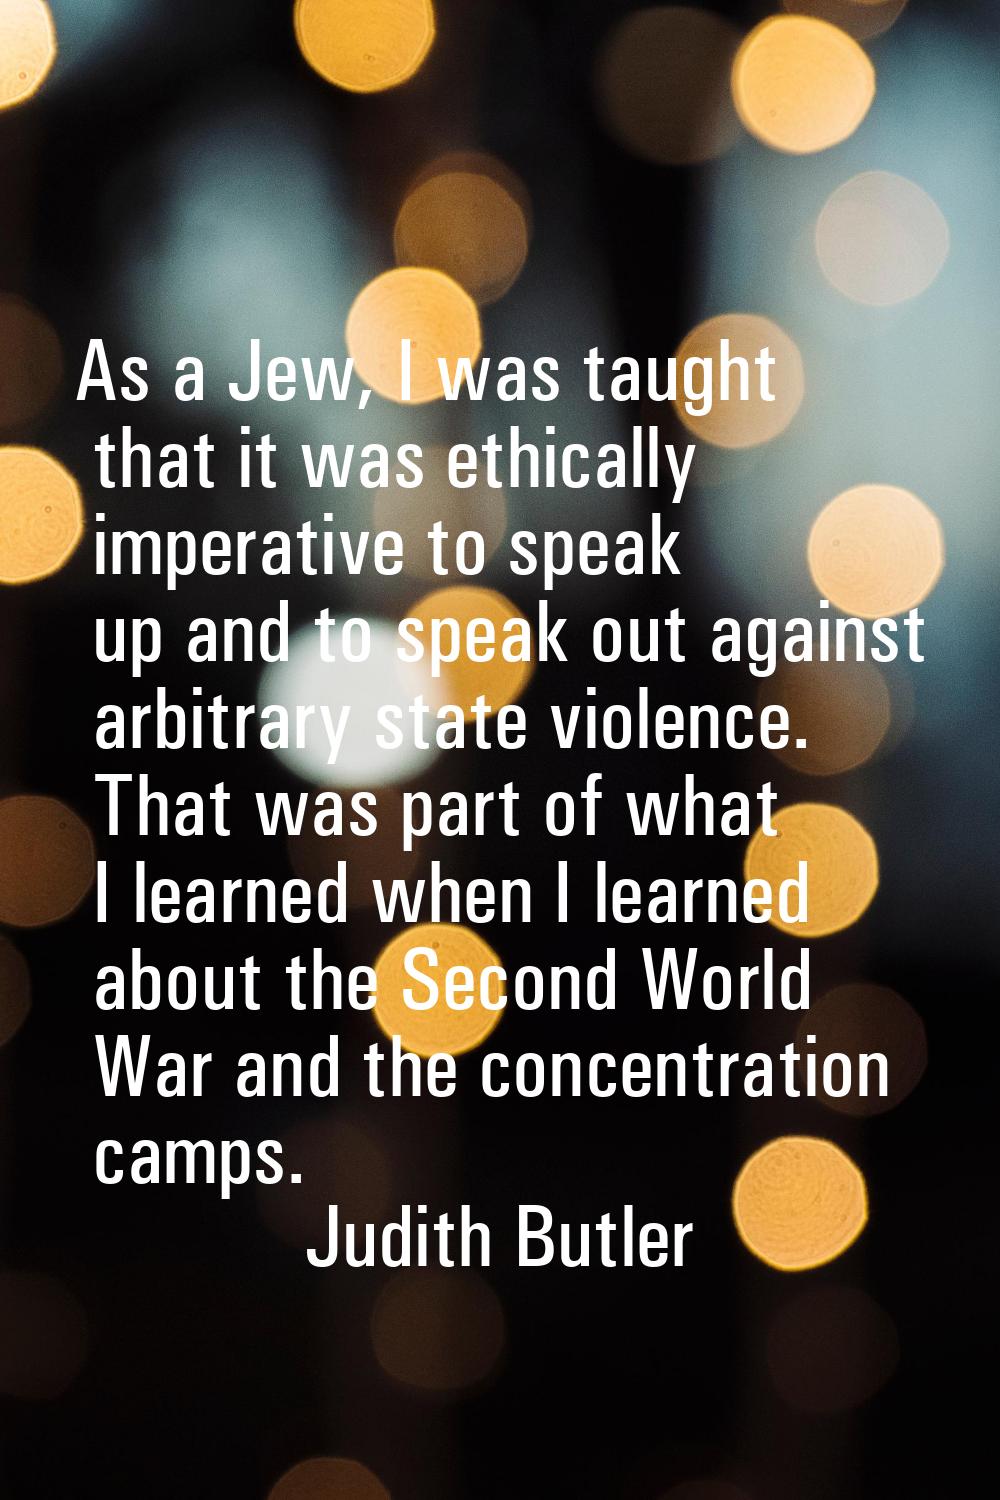 As a Jew, I was taught that it was ethically imperative to speak up and to speak out against arbitr